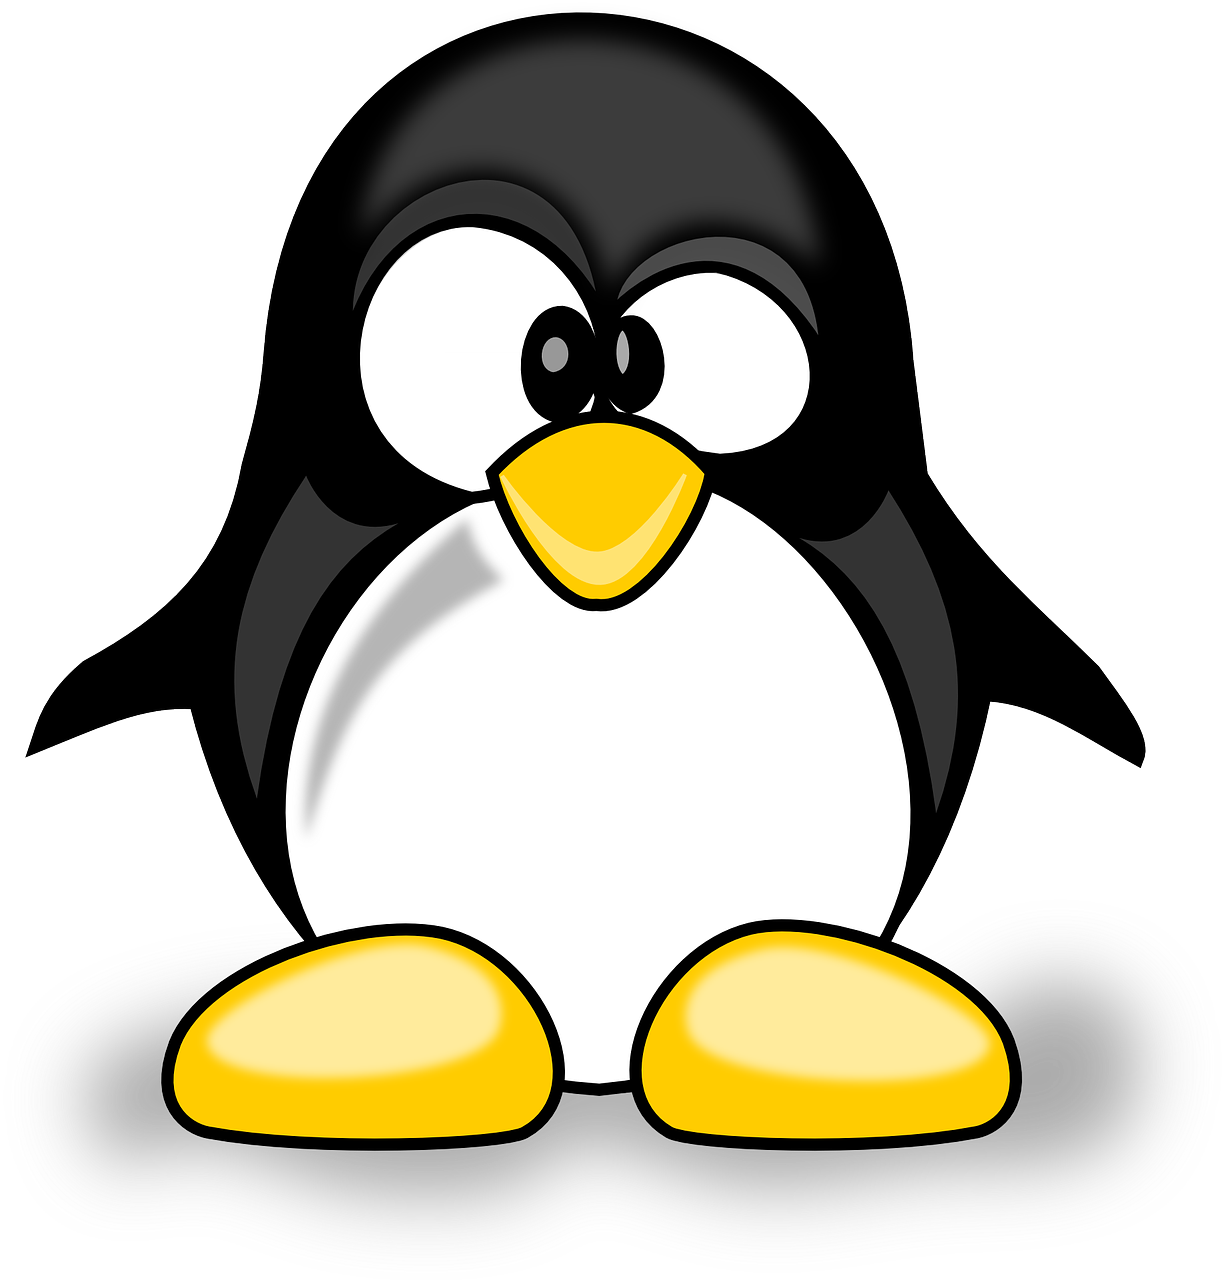 Igloo And Penguin Clipart - Cute Cartoon Penguins With Big Eyes (1222x1280)